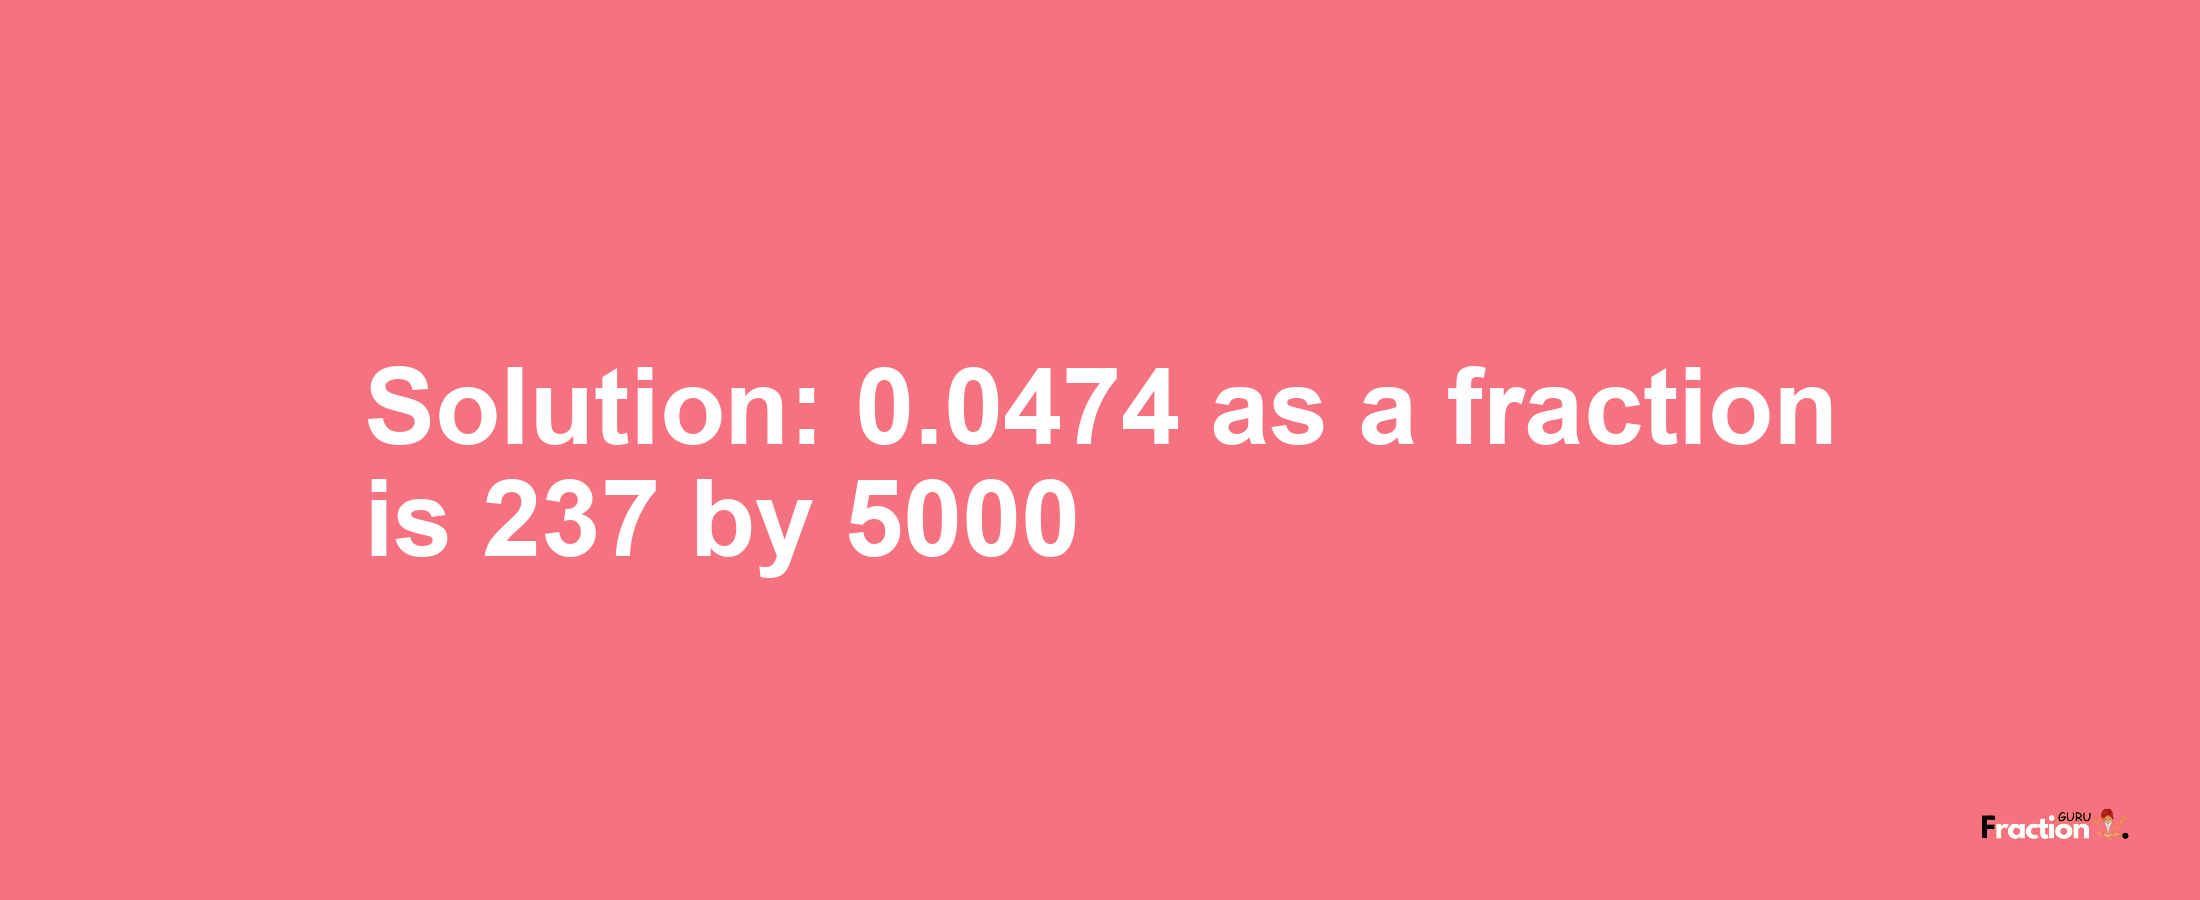 Solution:0.0474 as a fraction is 237/5000